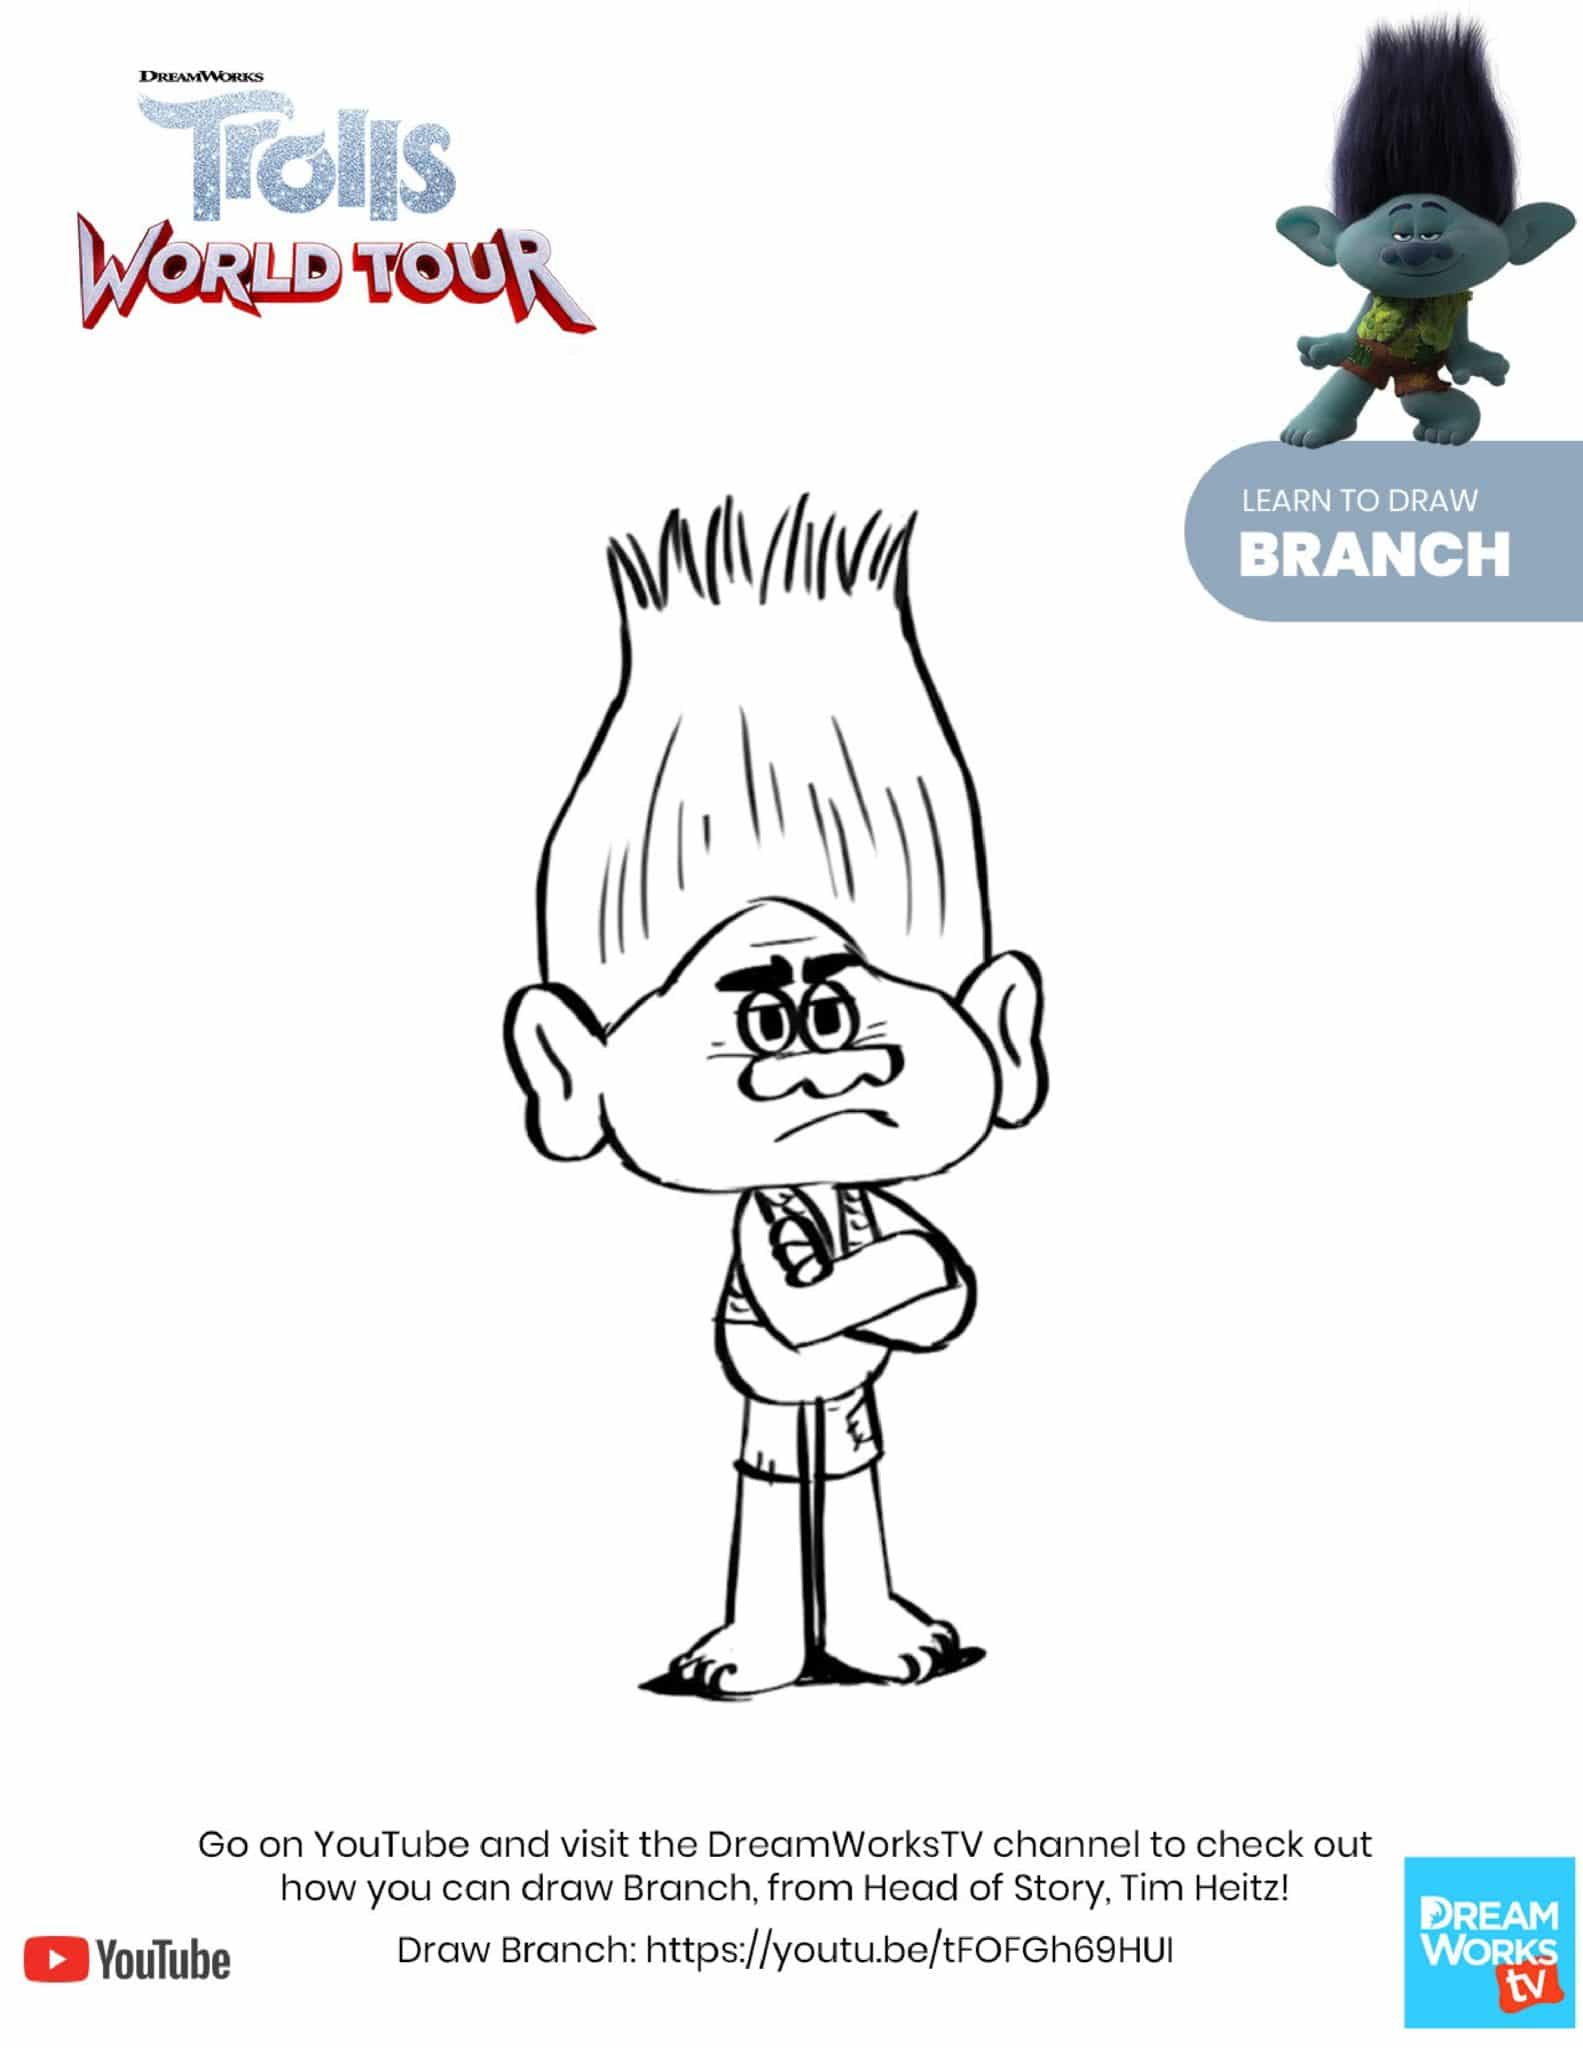 Learn to Draw Branch - Trolls World Tour Coloring Pages